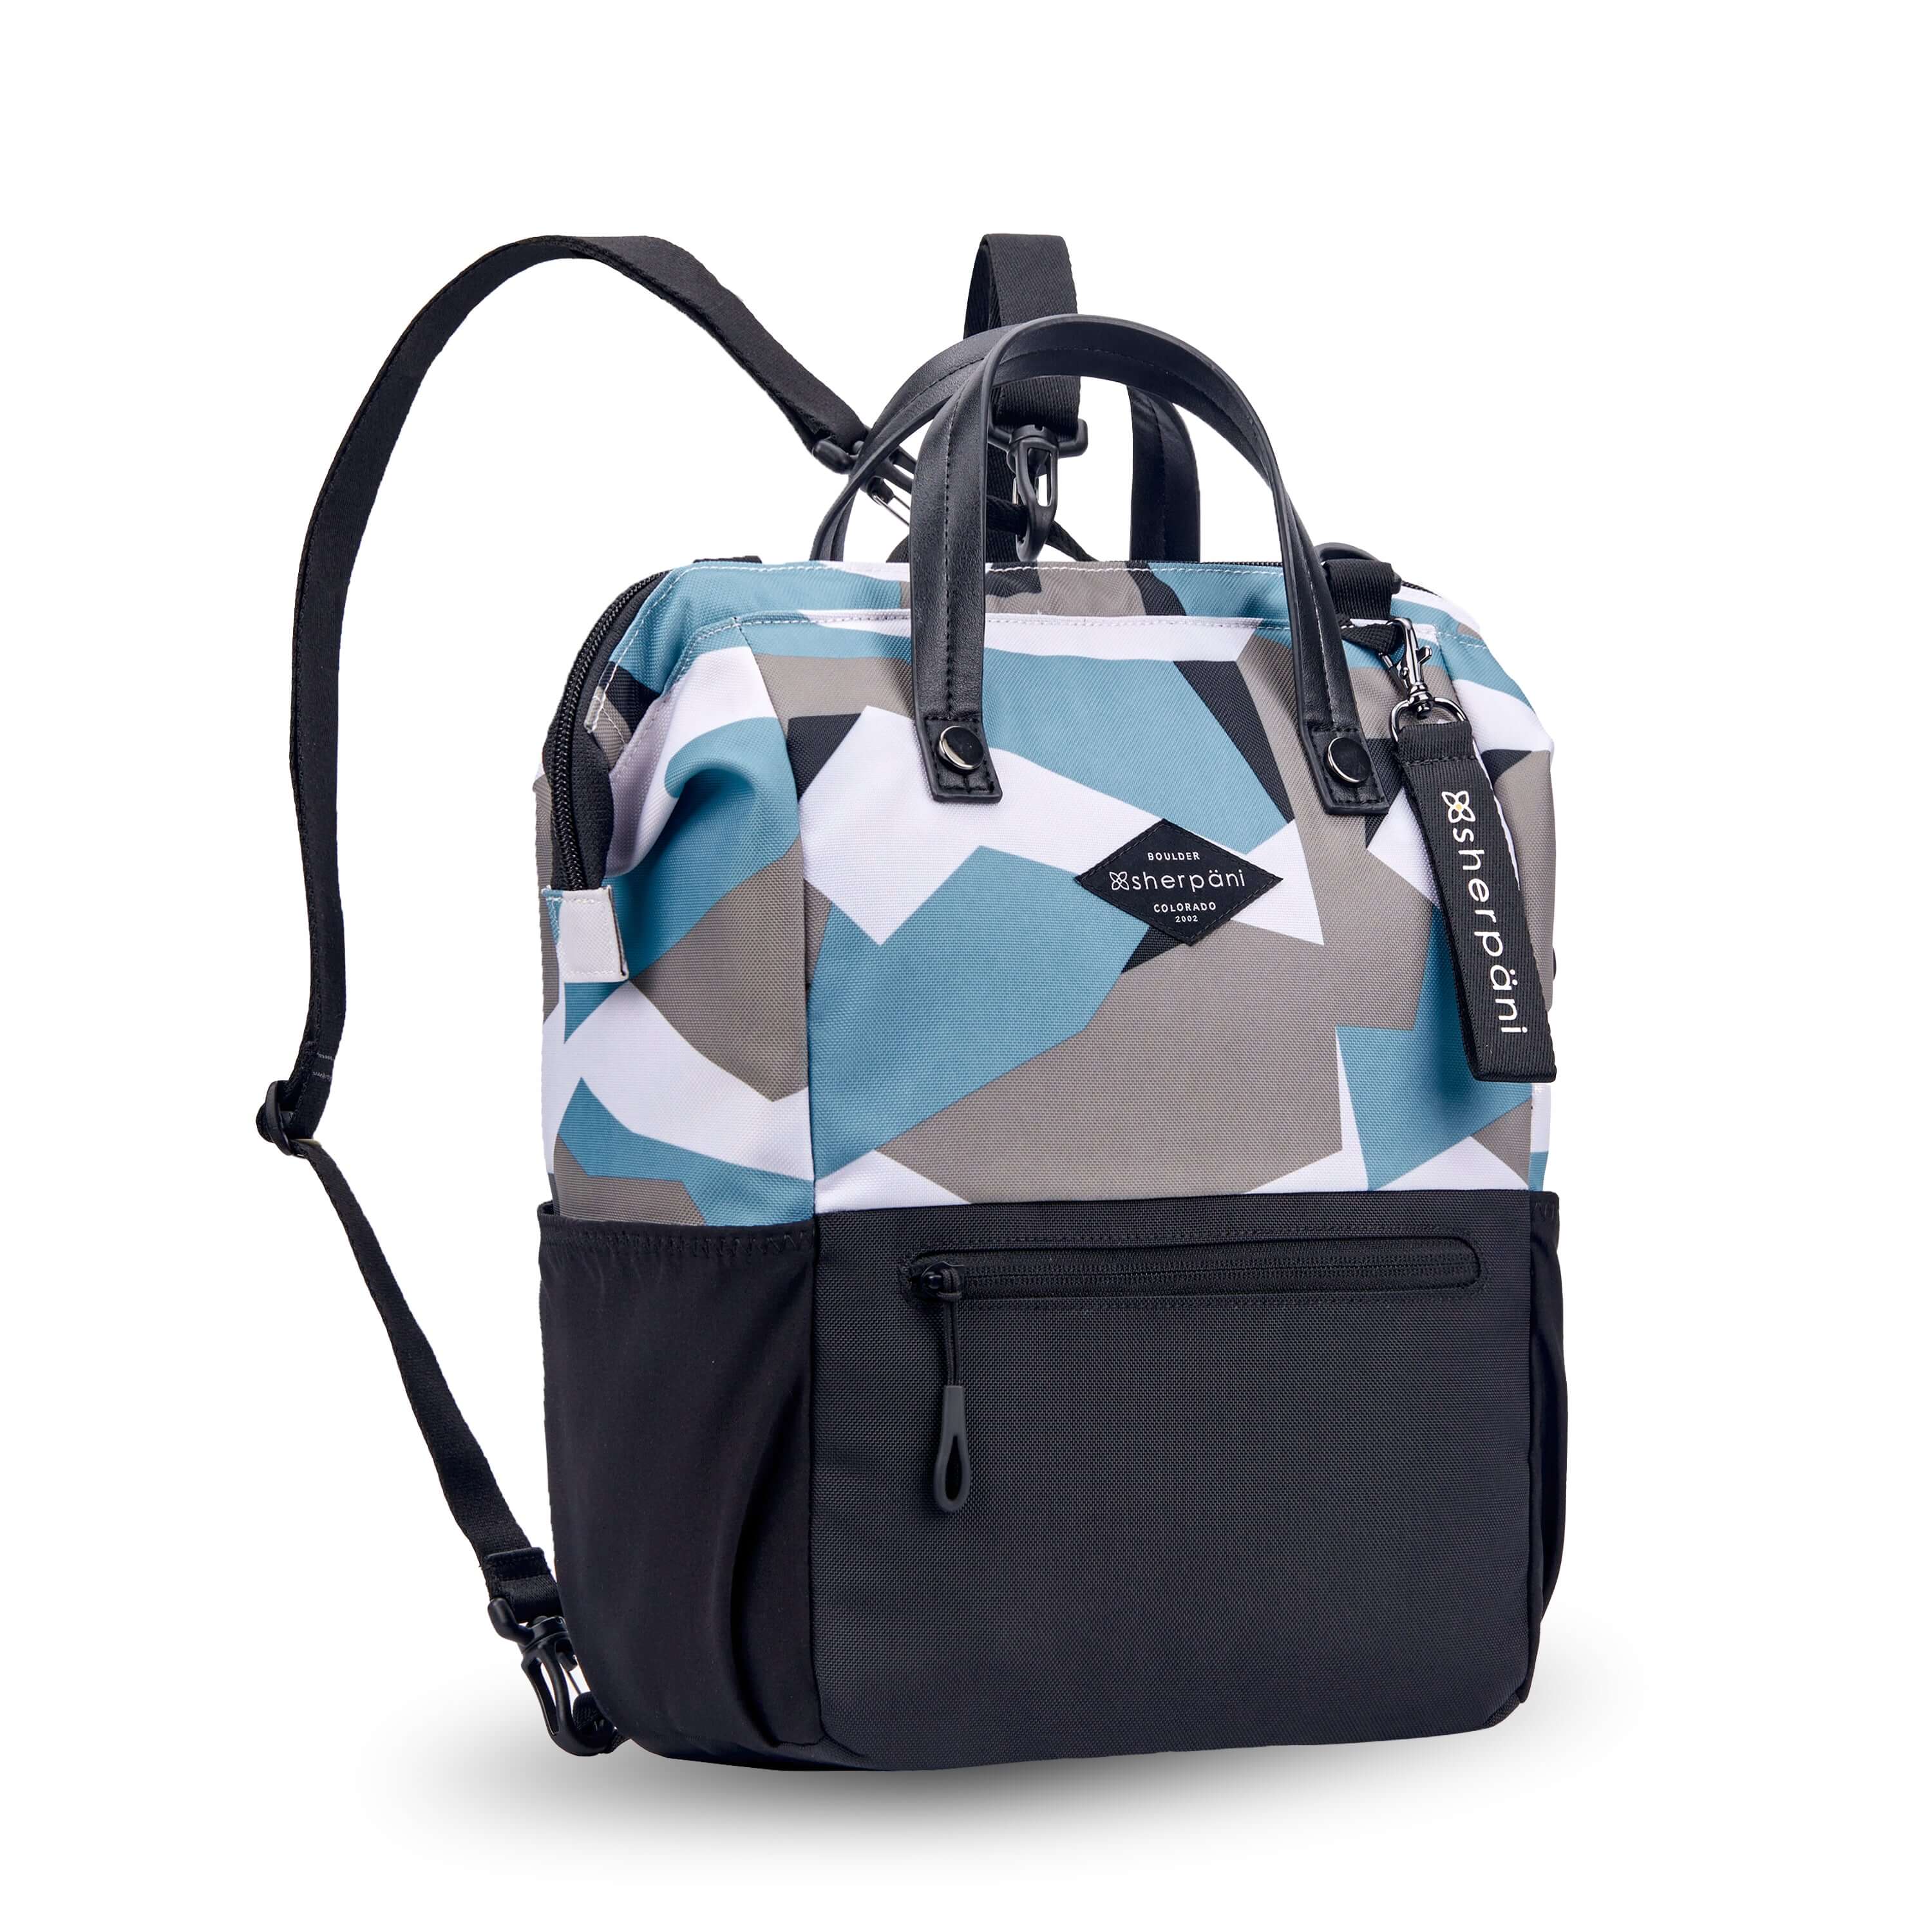 Angled front view of Sherpani three in one bag, the Dispatch in Summer Camo. The bag is two toned: the top is a camouflage pattern of light blue, gray and white, the bottom is black. There is an external zipper pocket on the front panel. Easy pull zippers are accented in black. A branded Sherpani keychain is clipped to the upper right corner. Water bottle holders sit on either side of the bag. It has short tote handles and adjustable straps that can function for a backpack or crossbody. 